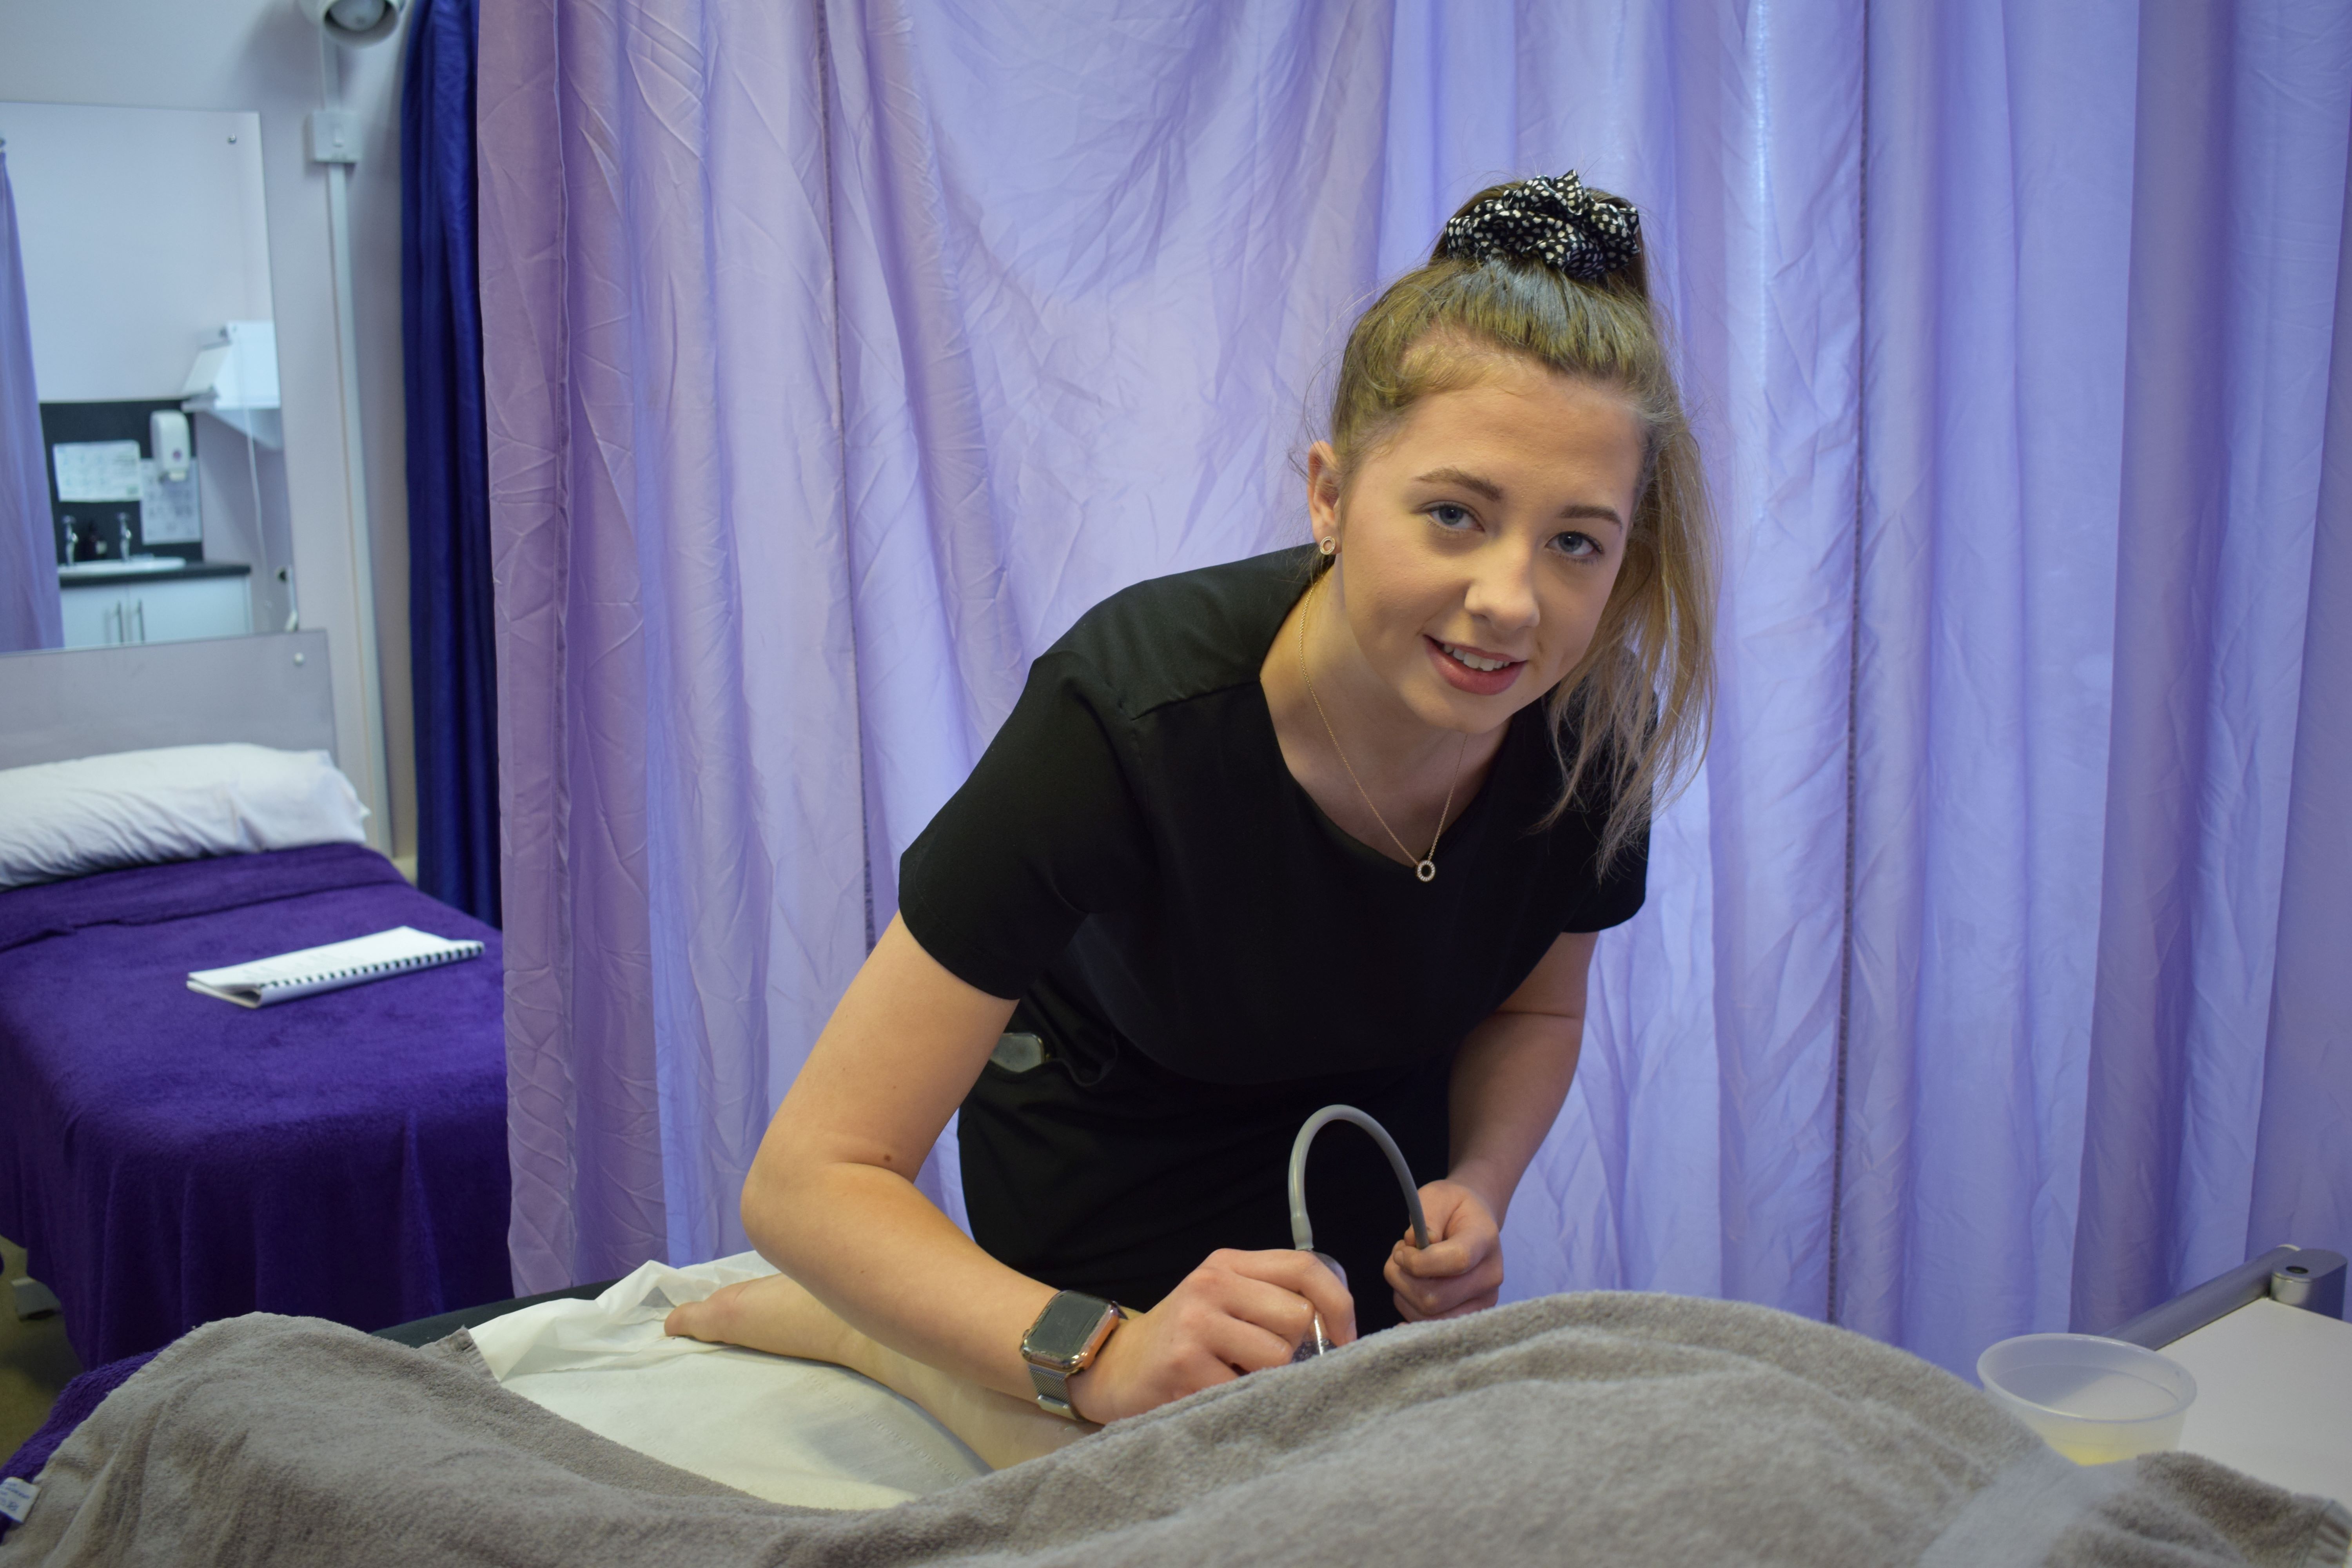 Teigan Campbell, beauty student carrying out a treatment in the commercial salon